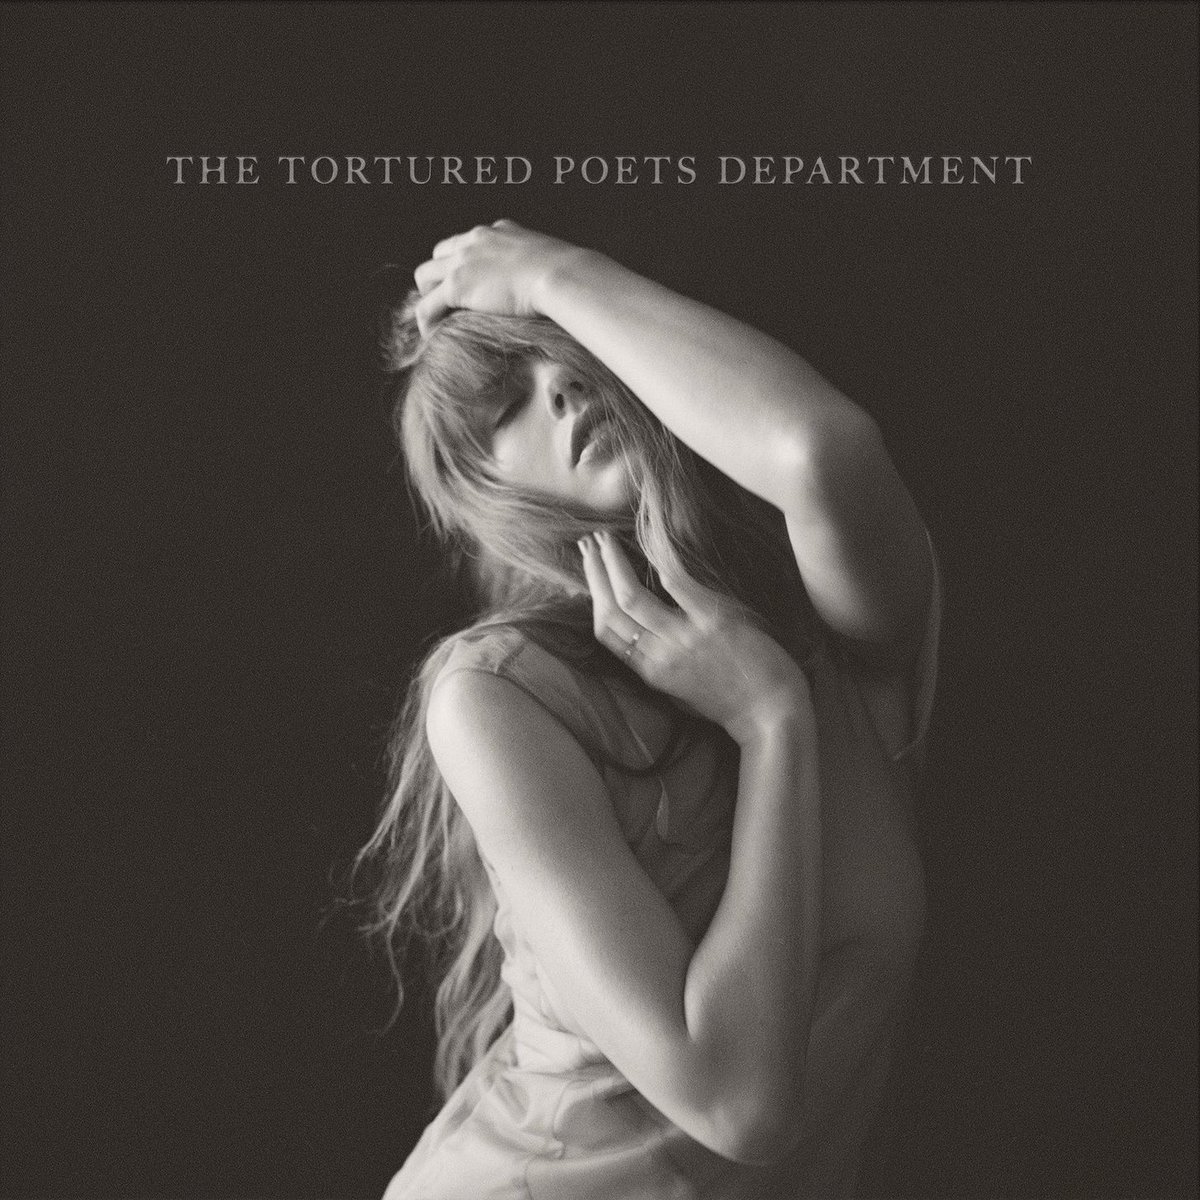 ‘The Tortured Poets Department’ by Taylor Swift remains at #1 on the Billboard 200 for a fifth week with 378k units.